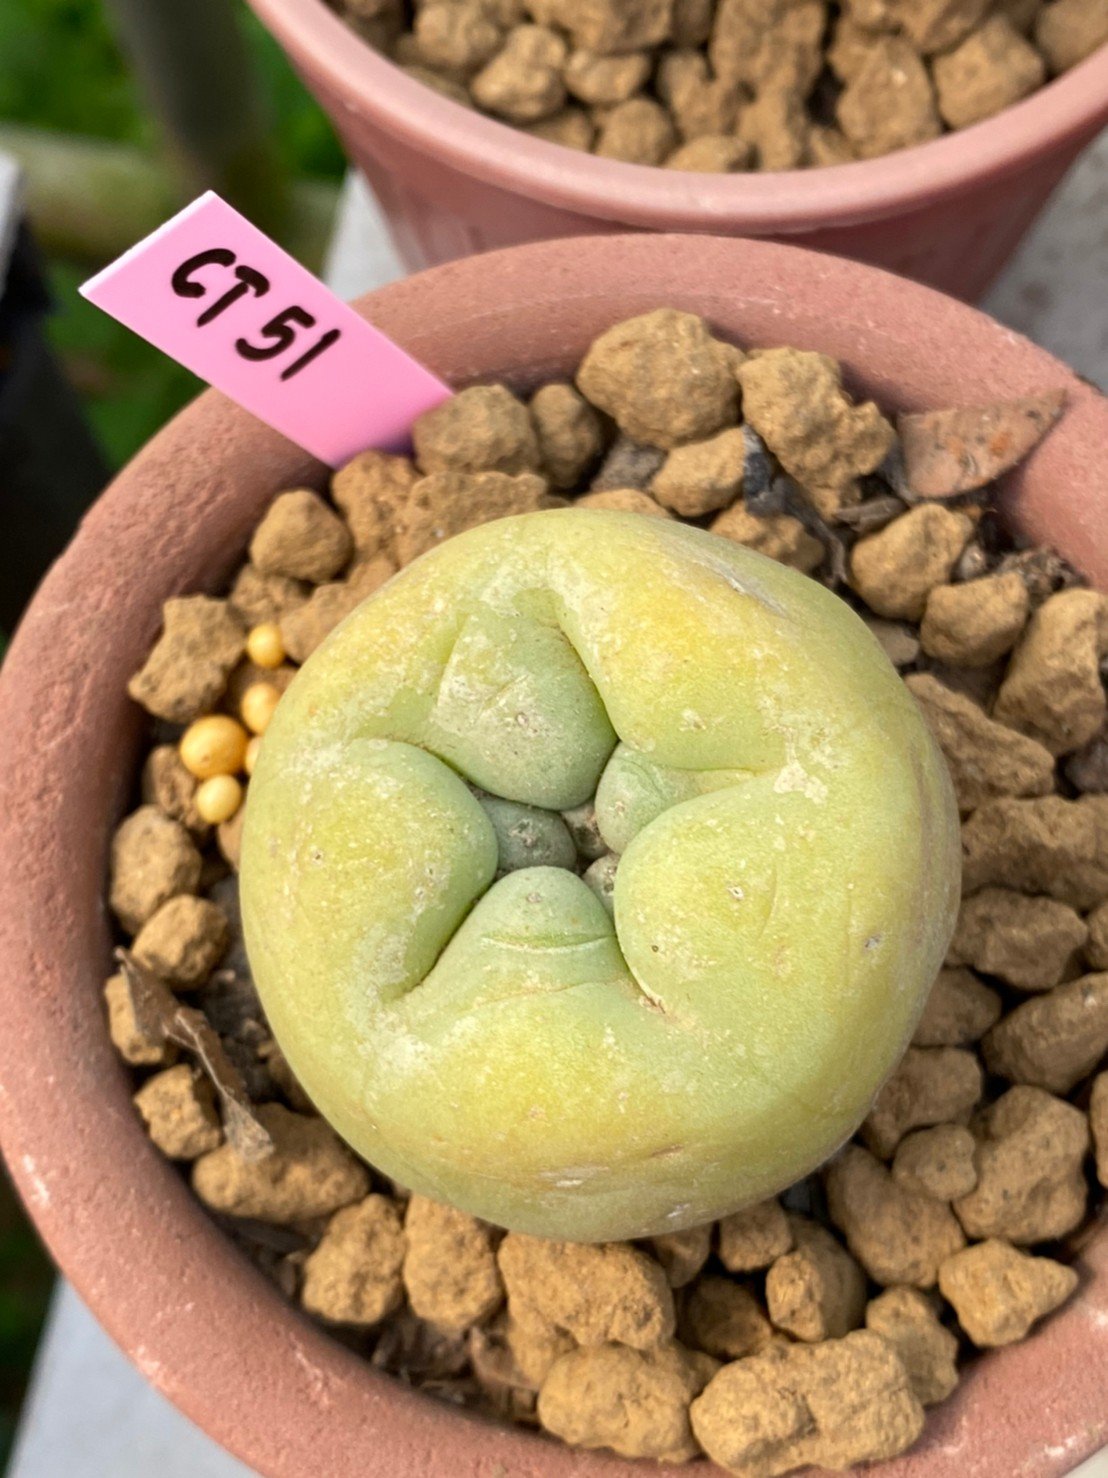 Lophophora Diffusa 6-7 cm 15 years old ownroot grow from seed japan